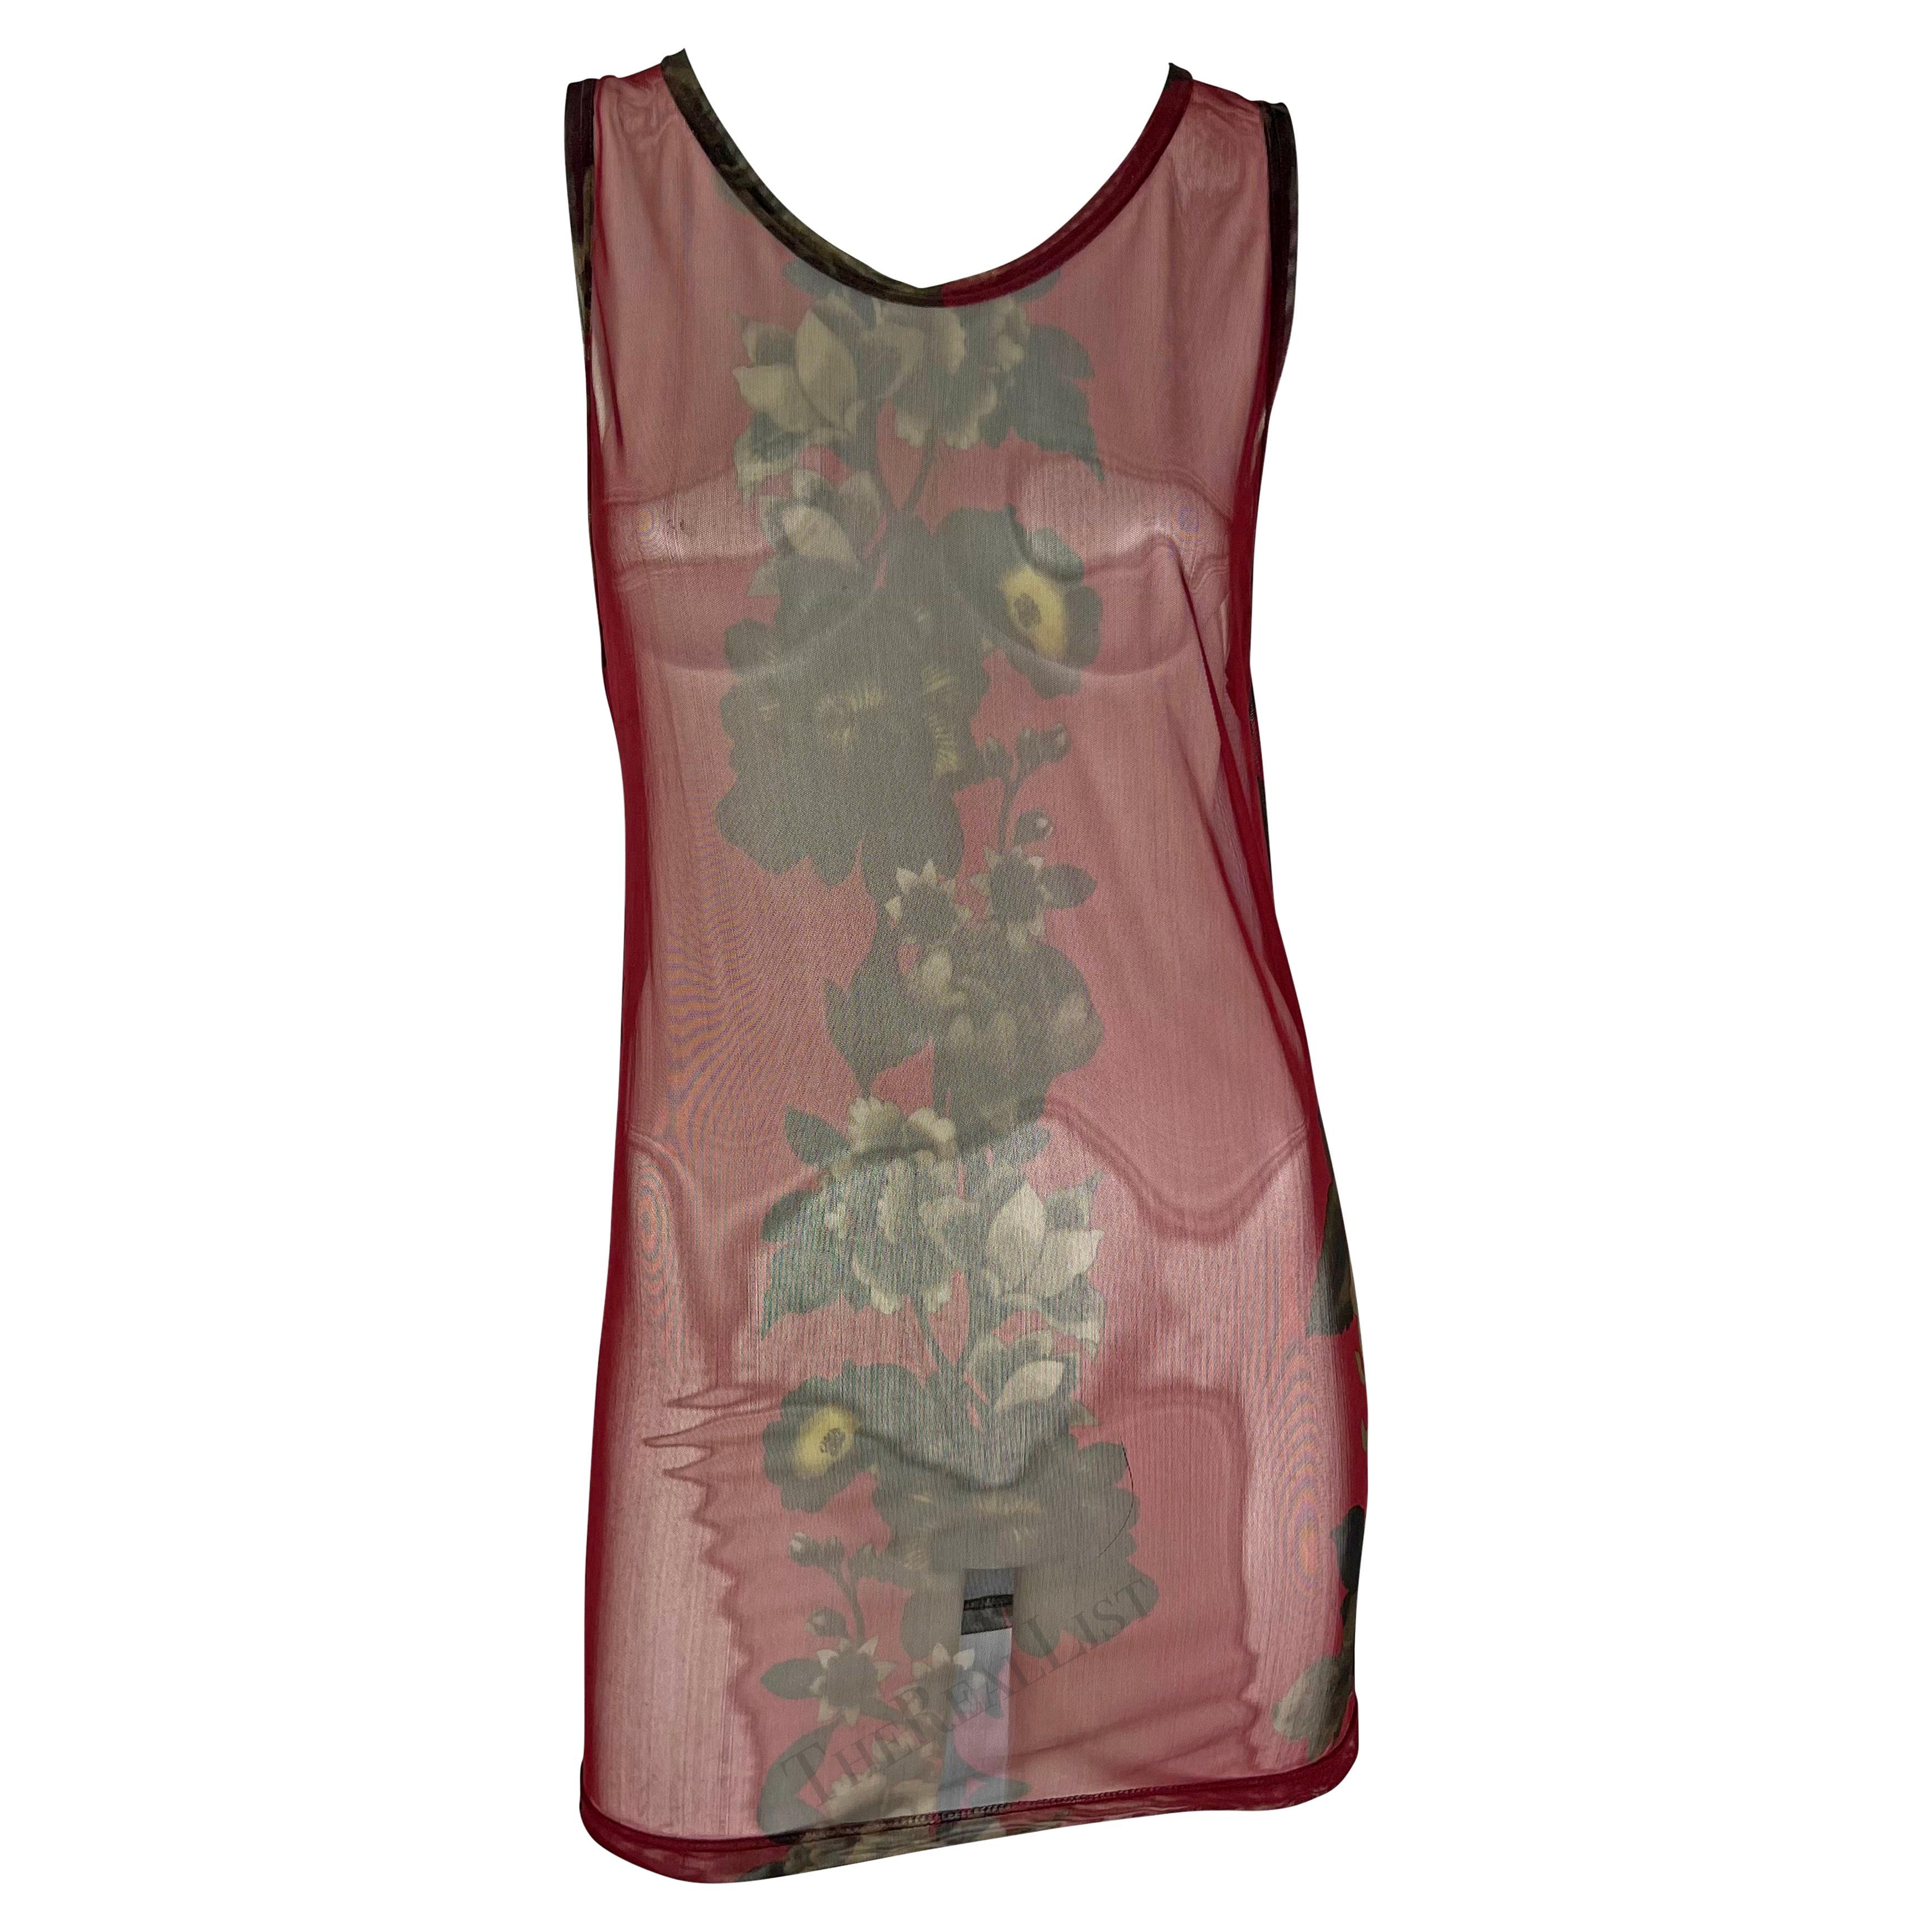 S/S 1999 Gucci by Tom Ford Red Floral Sheer Men's Burgundy Tank Top Mini Dress For Sale